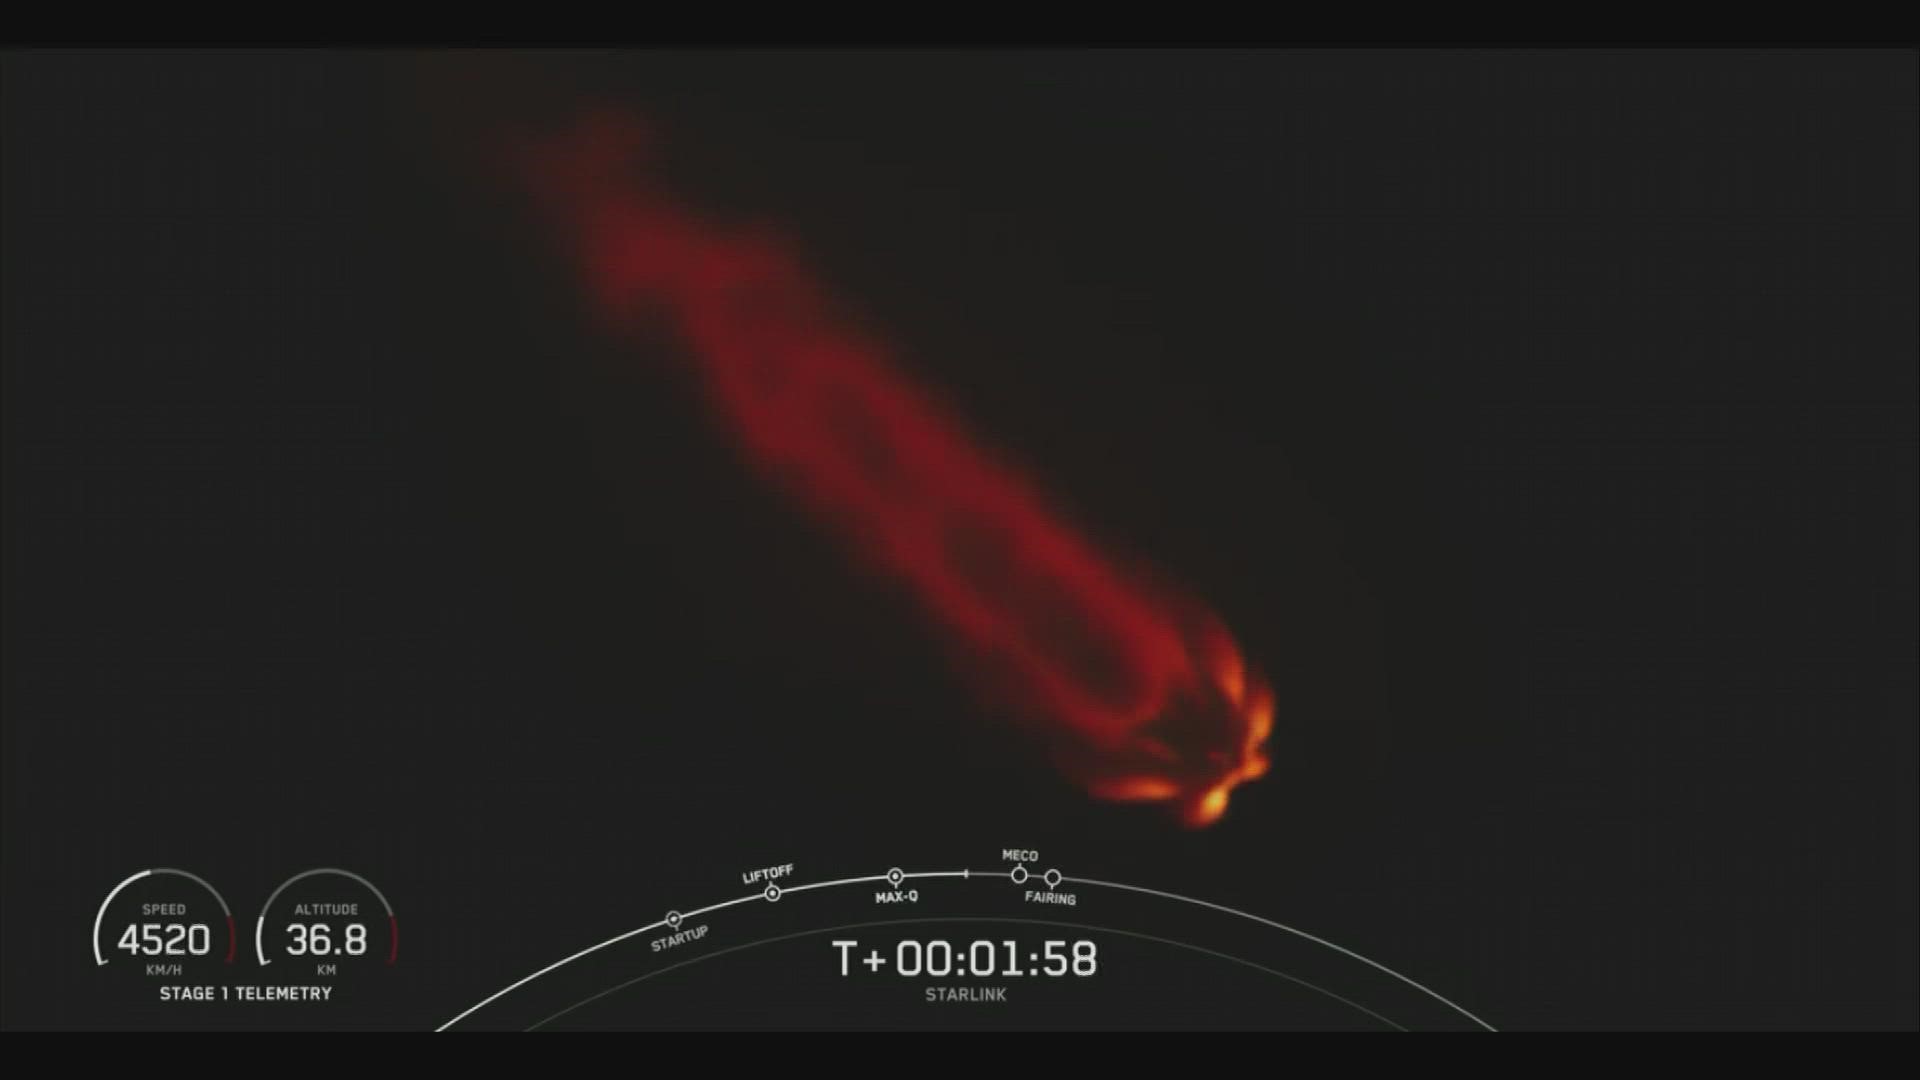 Following stage separation, Falcon 9’s first stage returned to Earth.